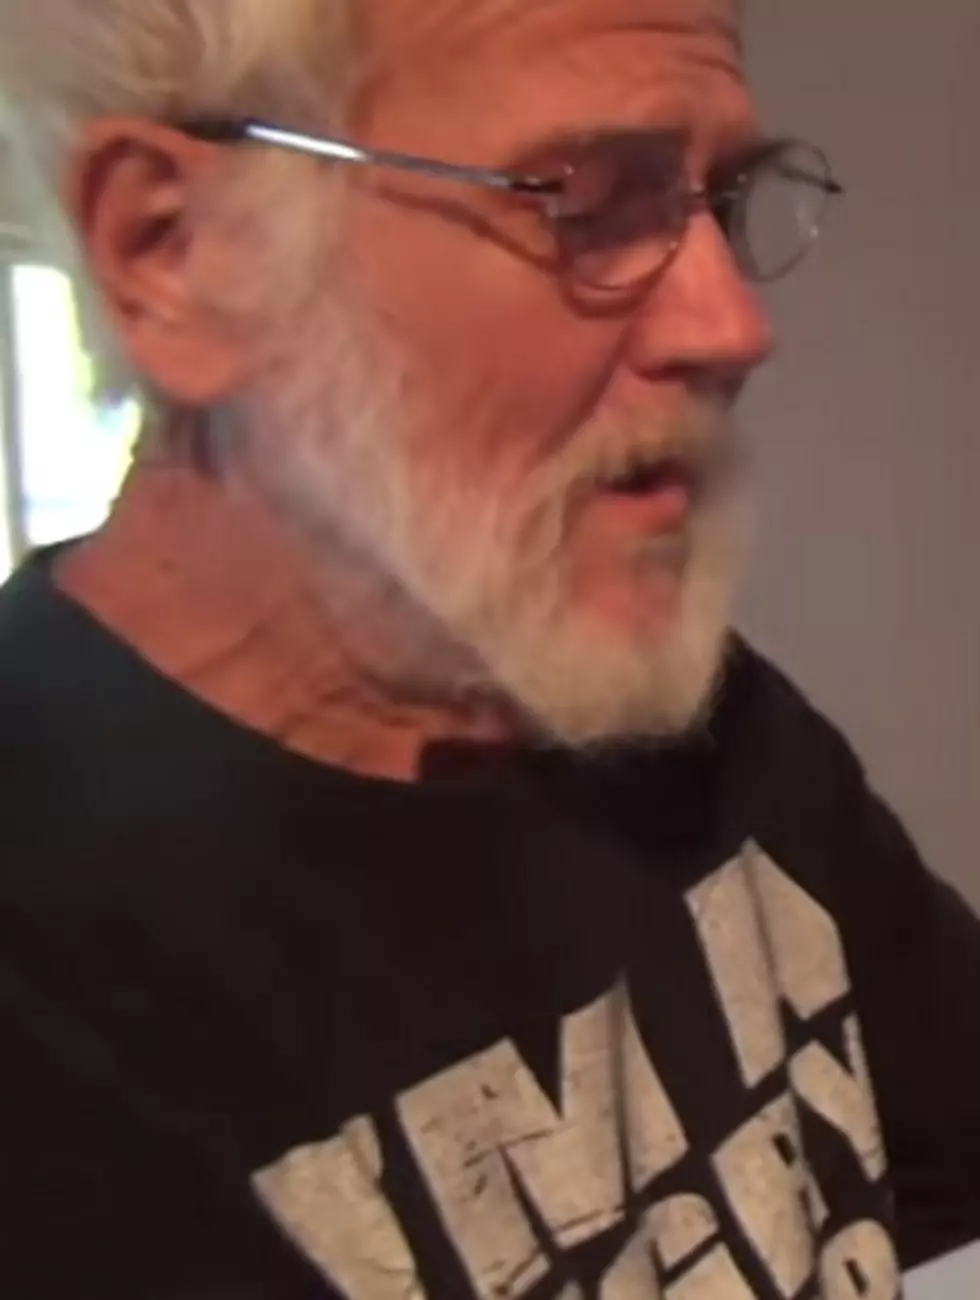 [Video] ‘Angry Grampa’ Gets A Surprise That Will Bring YouTo Tears